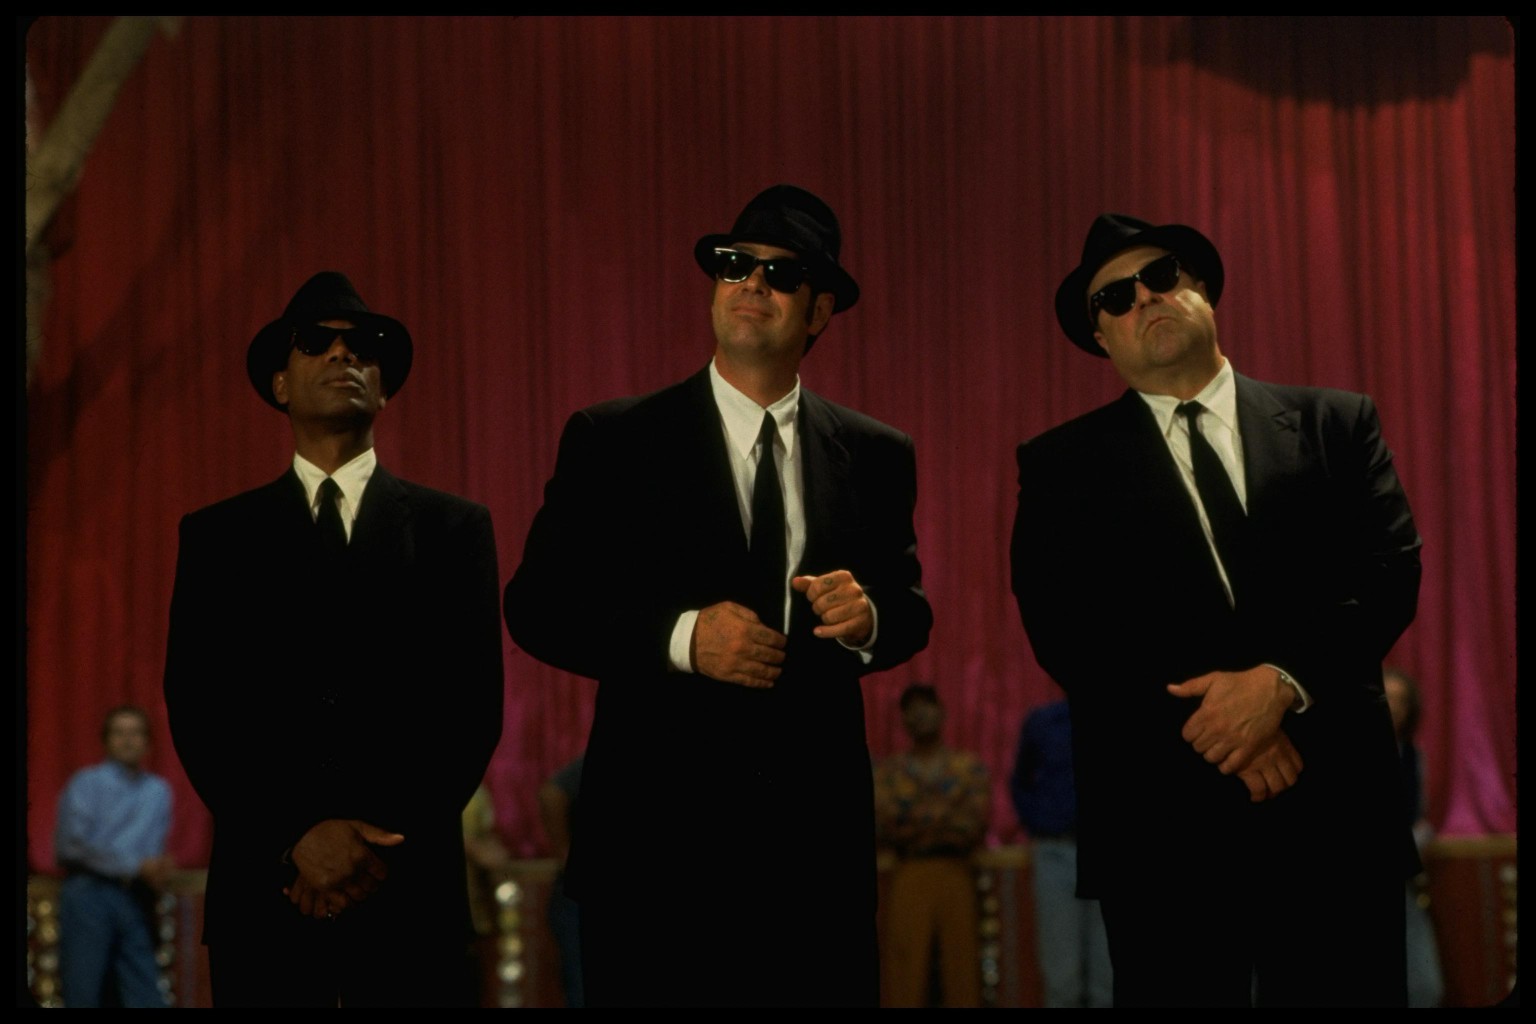 Bluegrass blues brothers 2000 torrent vmware thinstall torrent